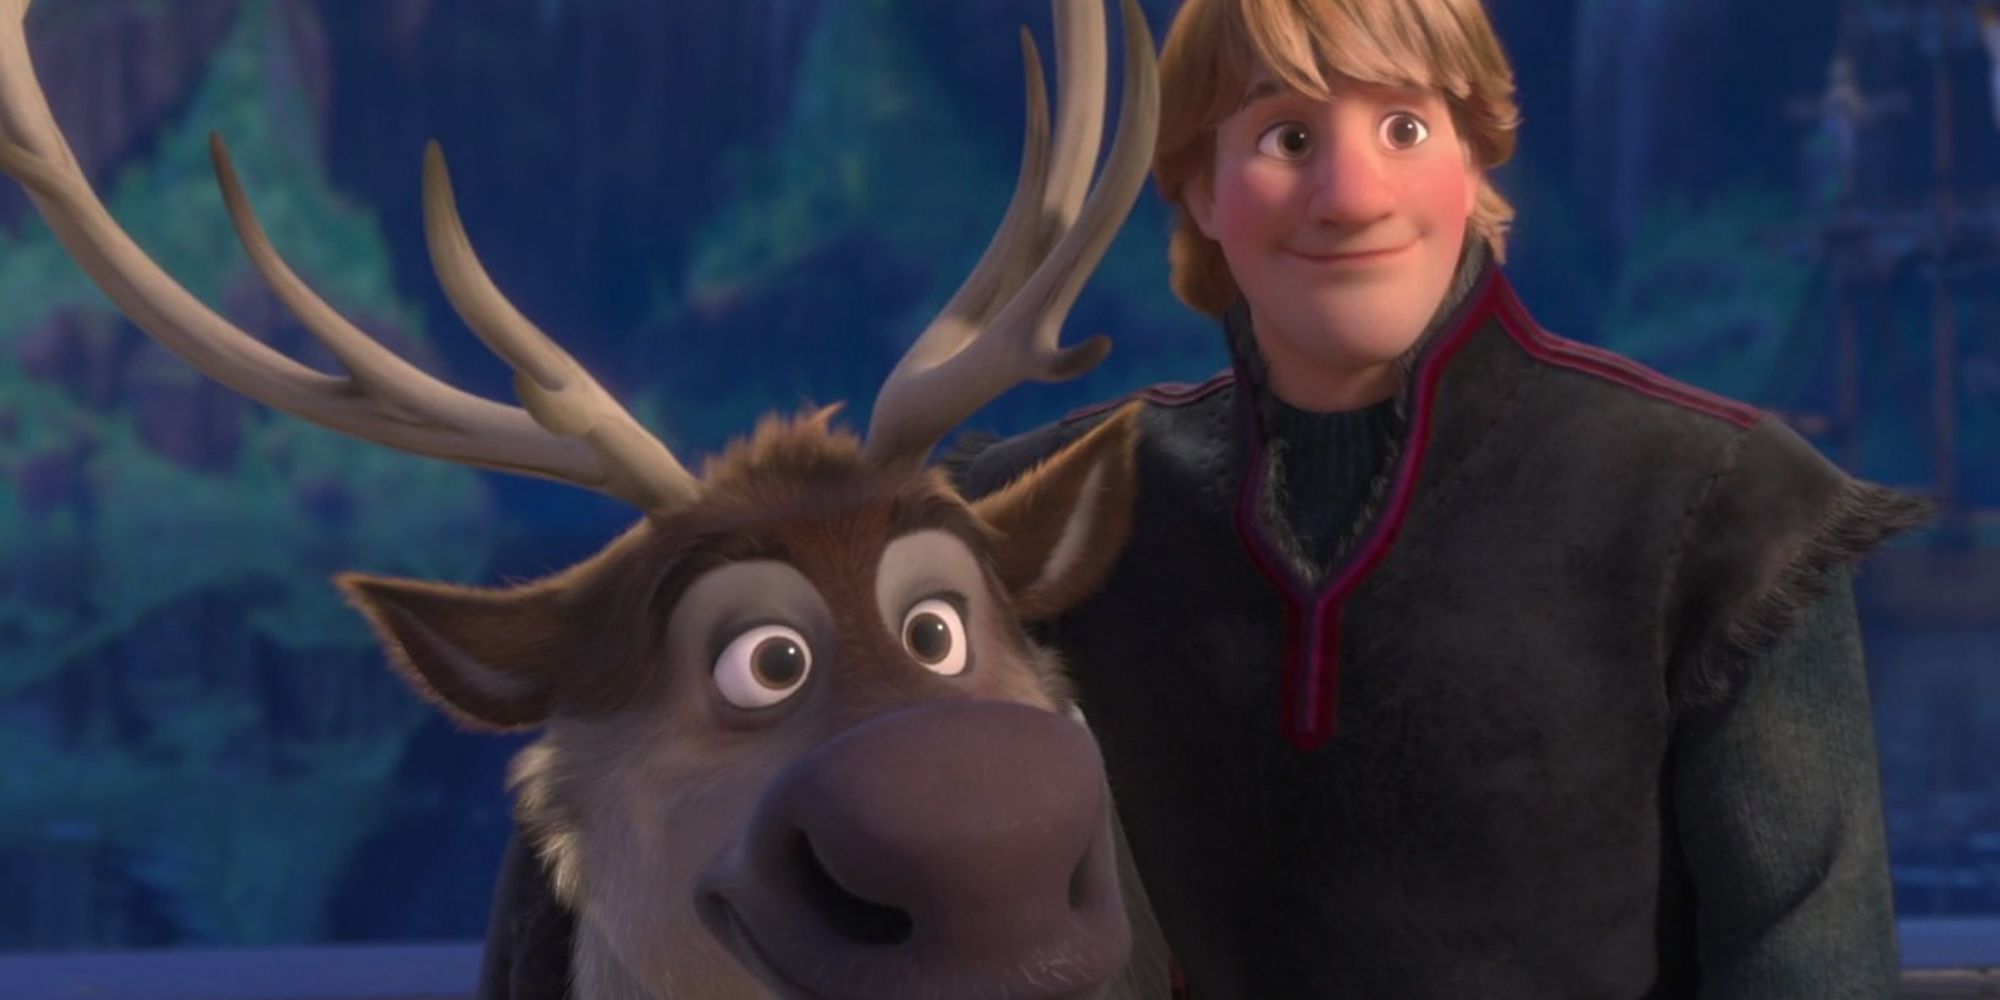 Sven and Kristoff next to each other